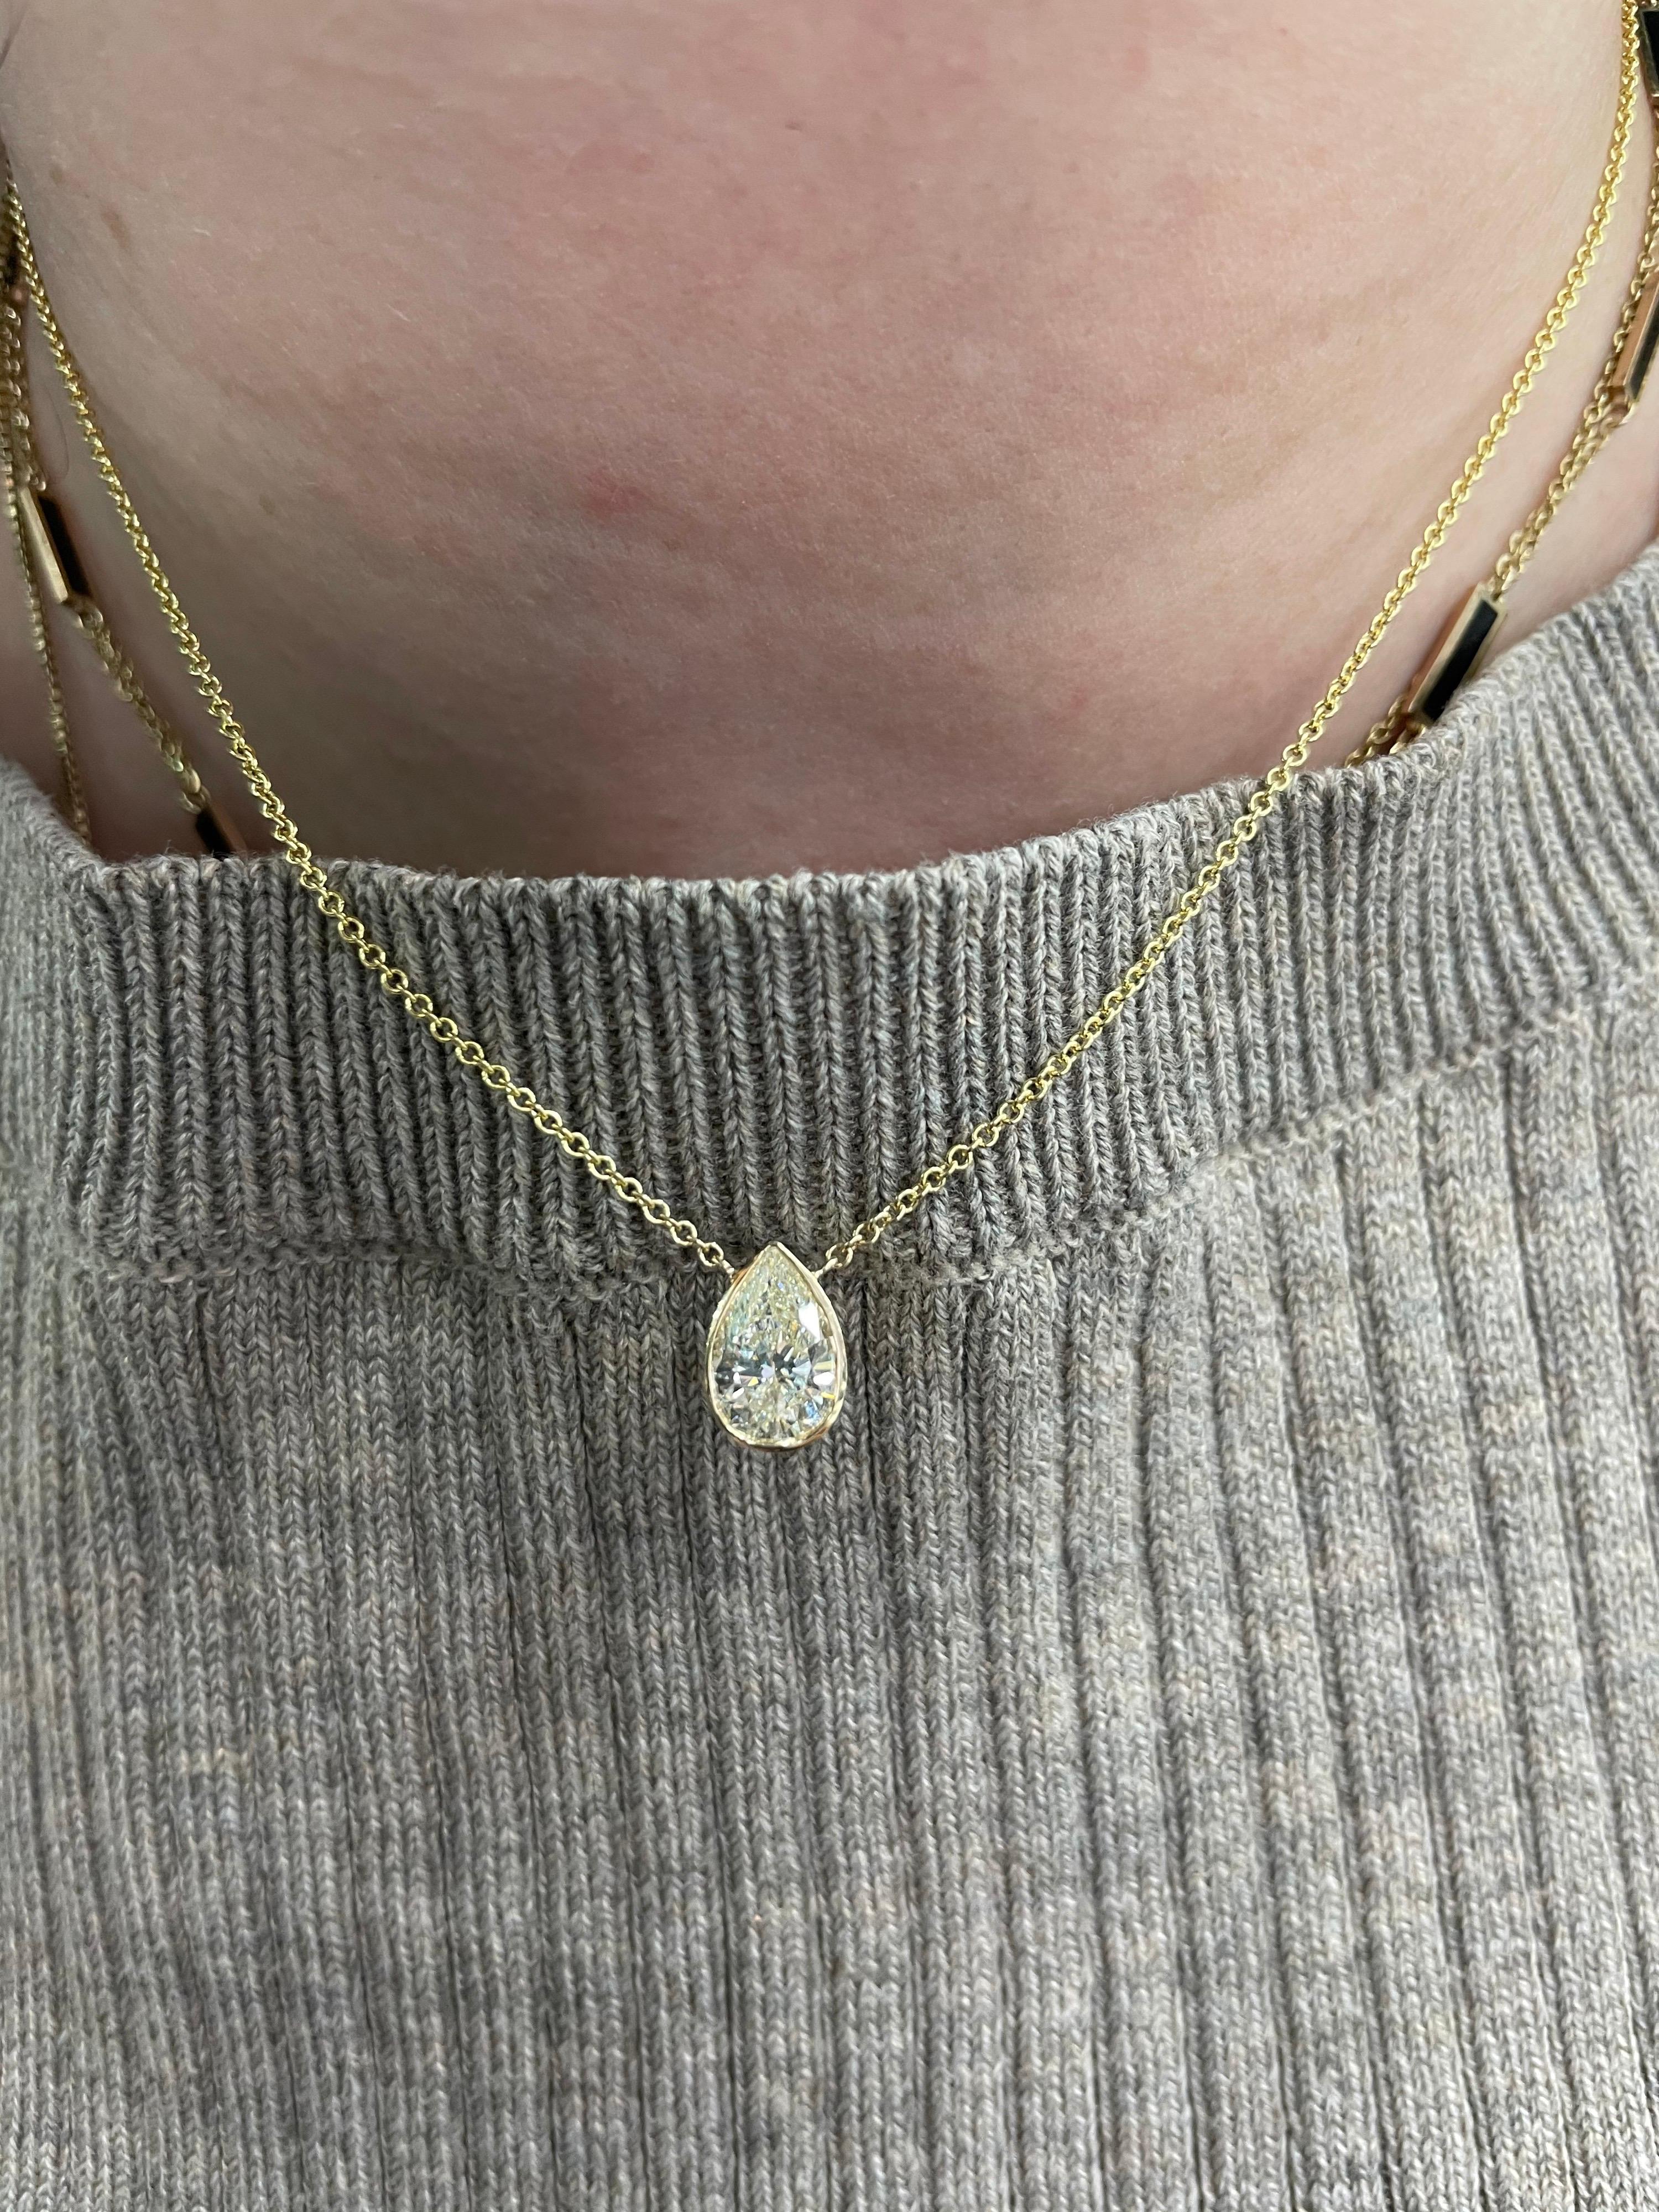 14 Karat  Yellow Gold solitaire pendant necklace featuring one Pear shape diamond weighing 1.32 carats. 
Brilliant cut stone.
Great for layering or alone. 